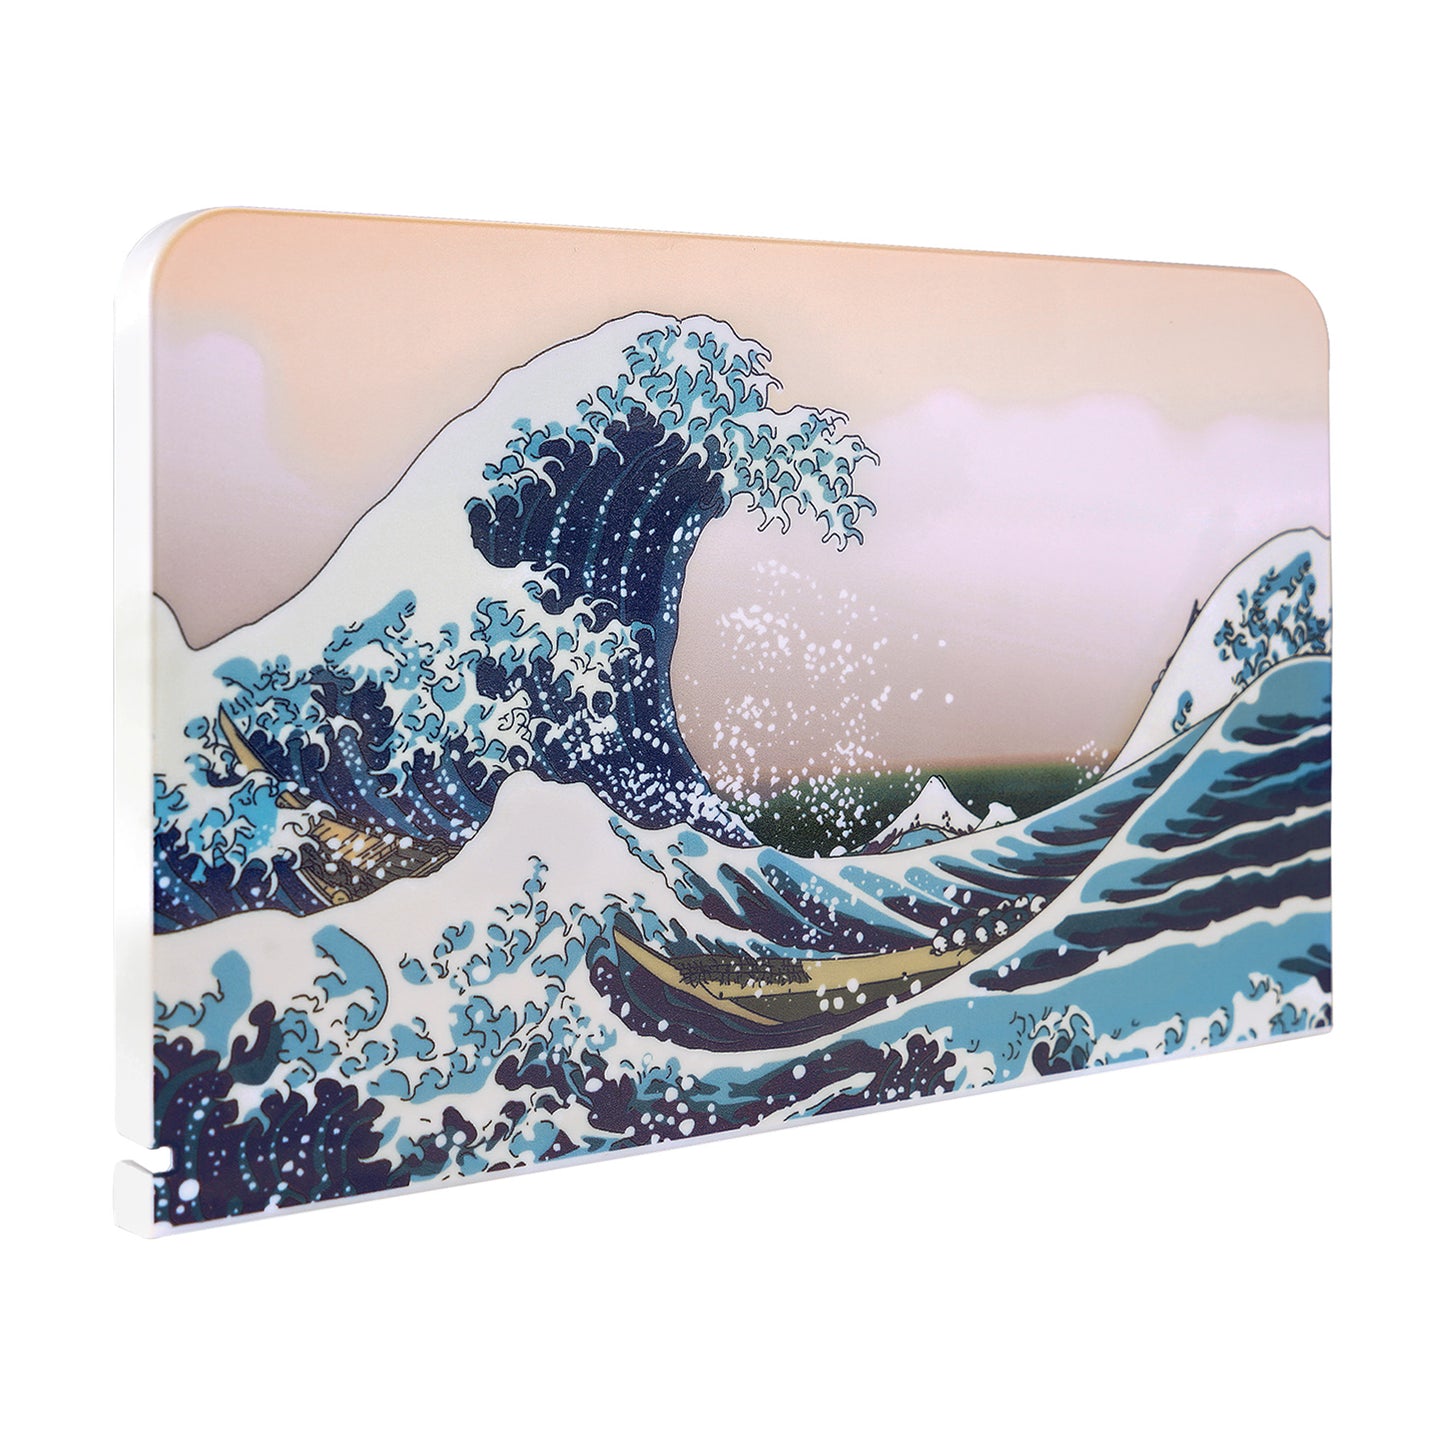 PlayVital The Great Wave Custom Dock Faceplate Cover for Nintendo Switch OLED Charging Dock - NTG8001 PlayVital